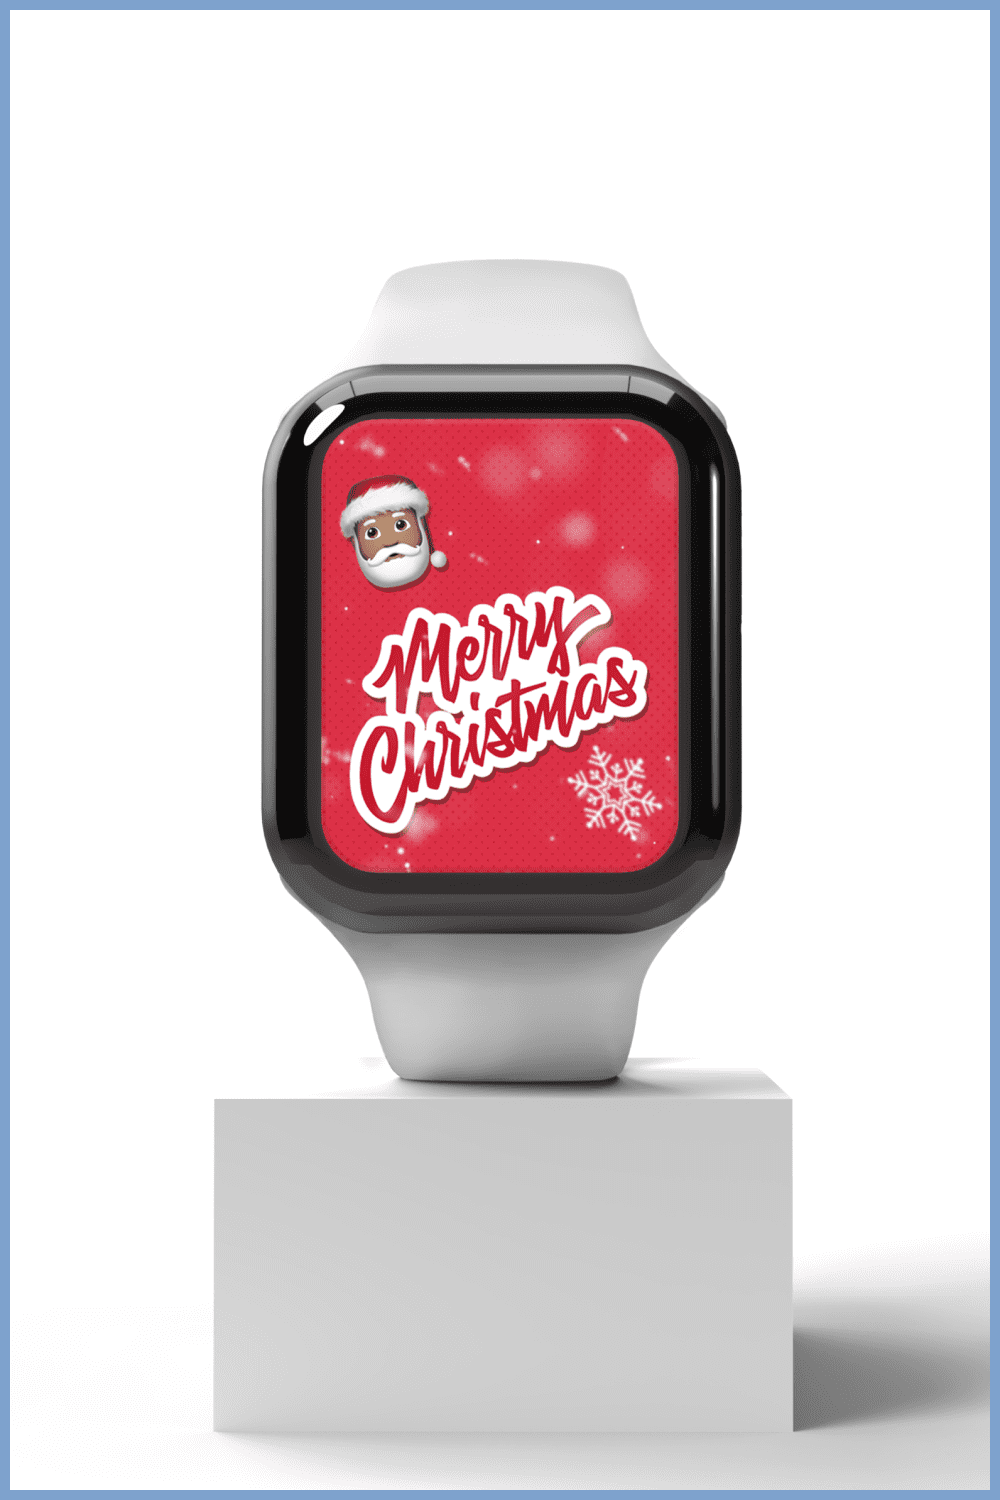 Red background with Santa's face and Merry Christmas sign.